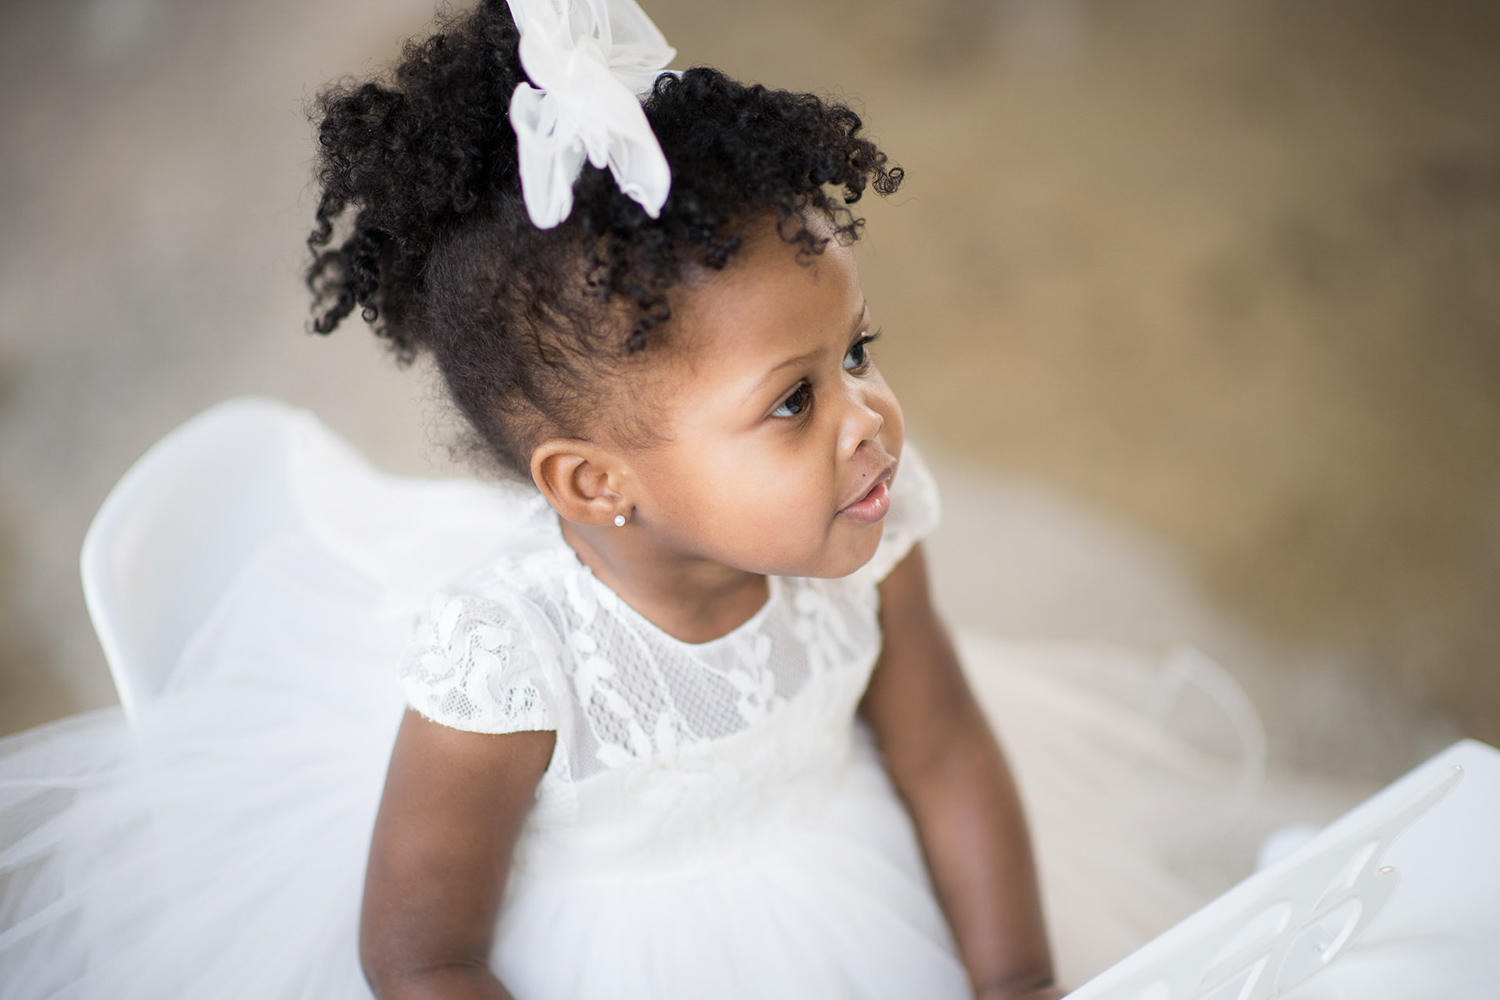 Chicago toddler sits in a white dress and looks at her parents during a photo session.